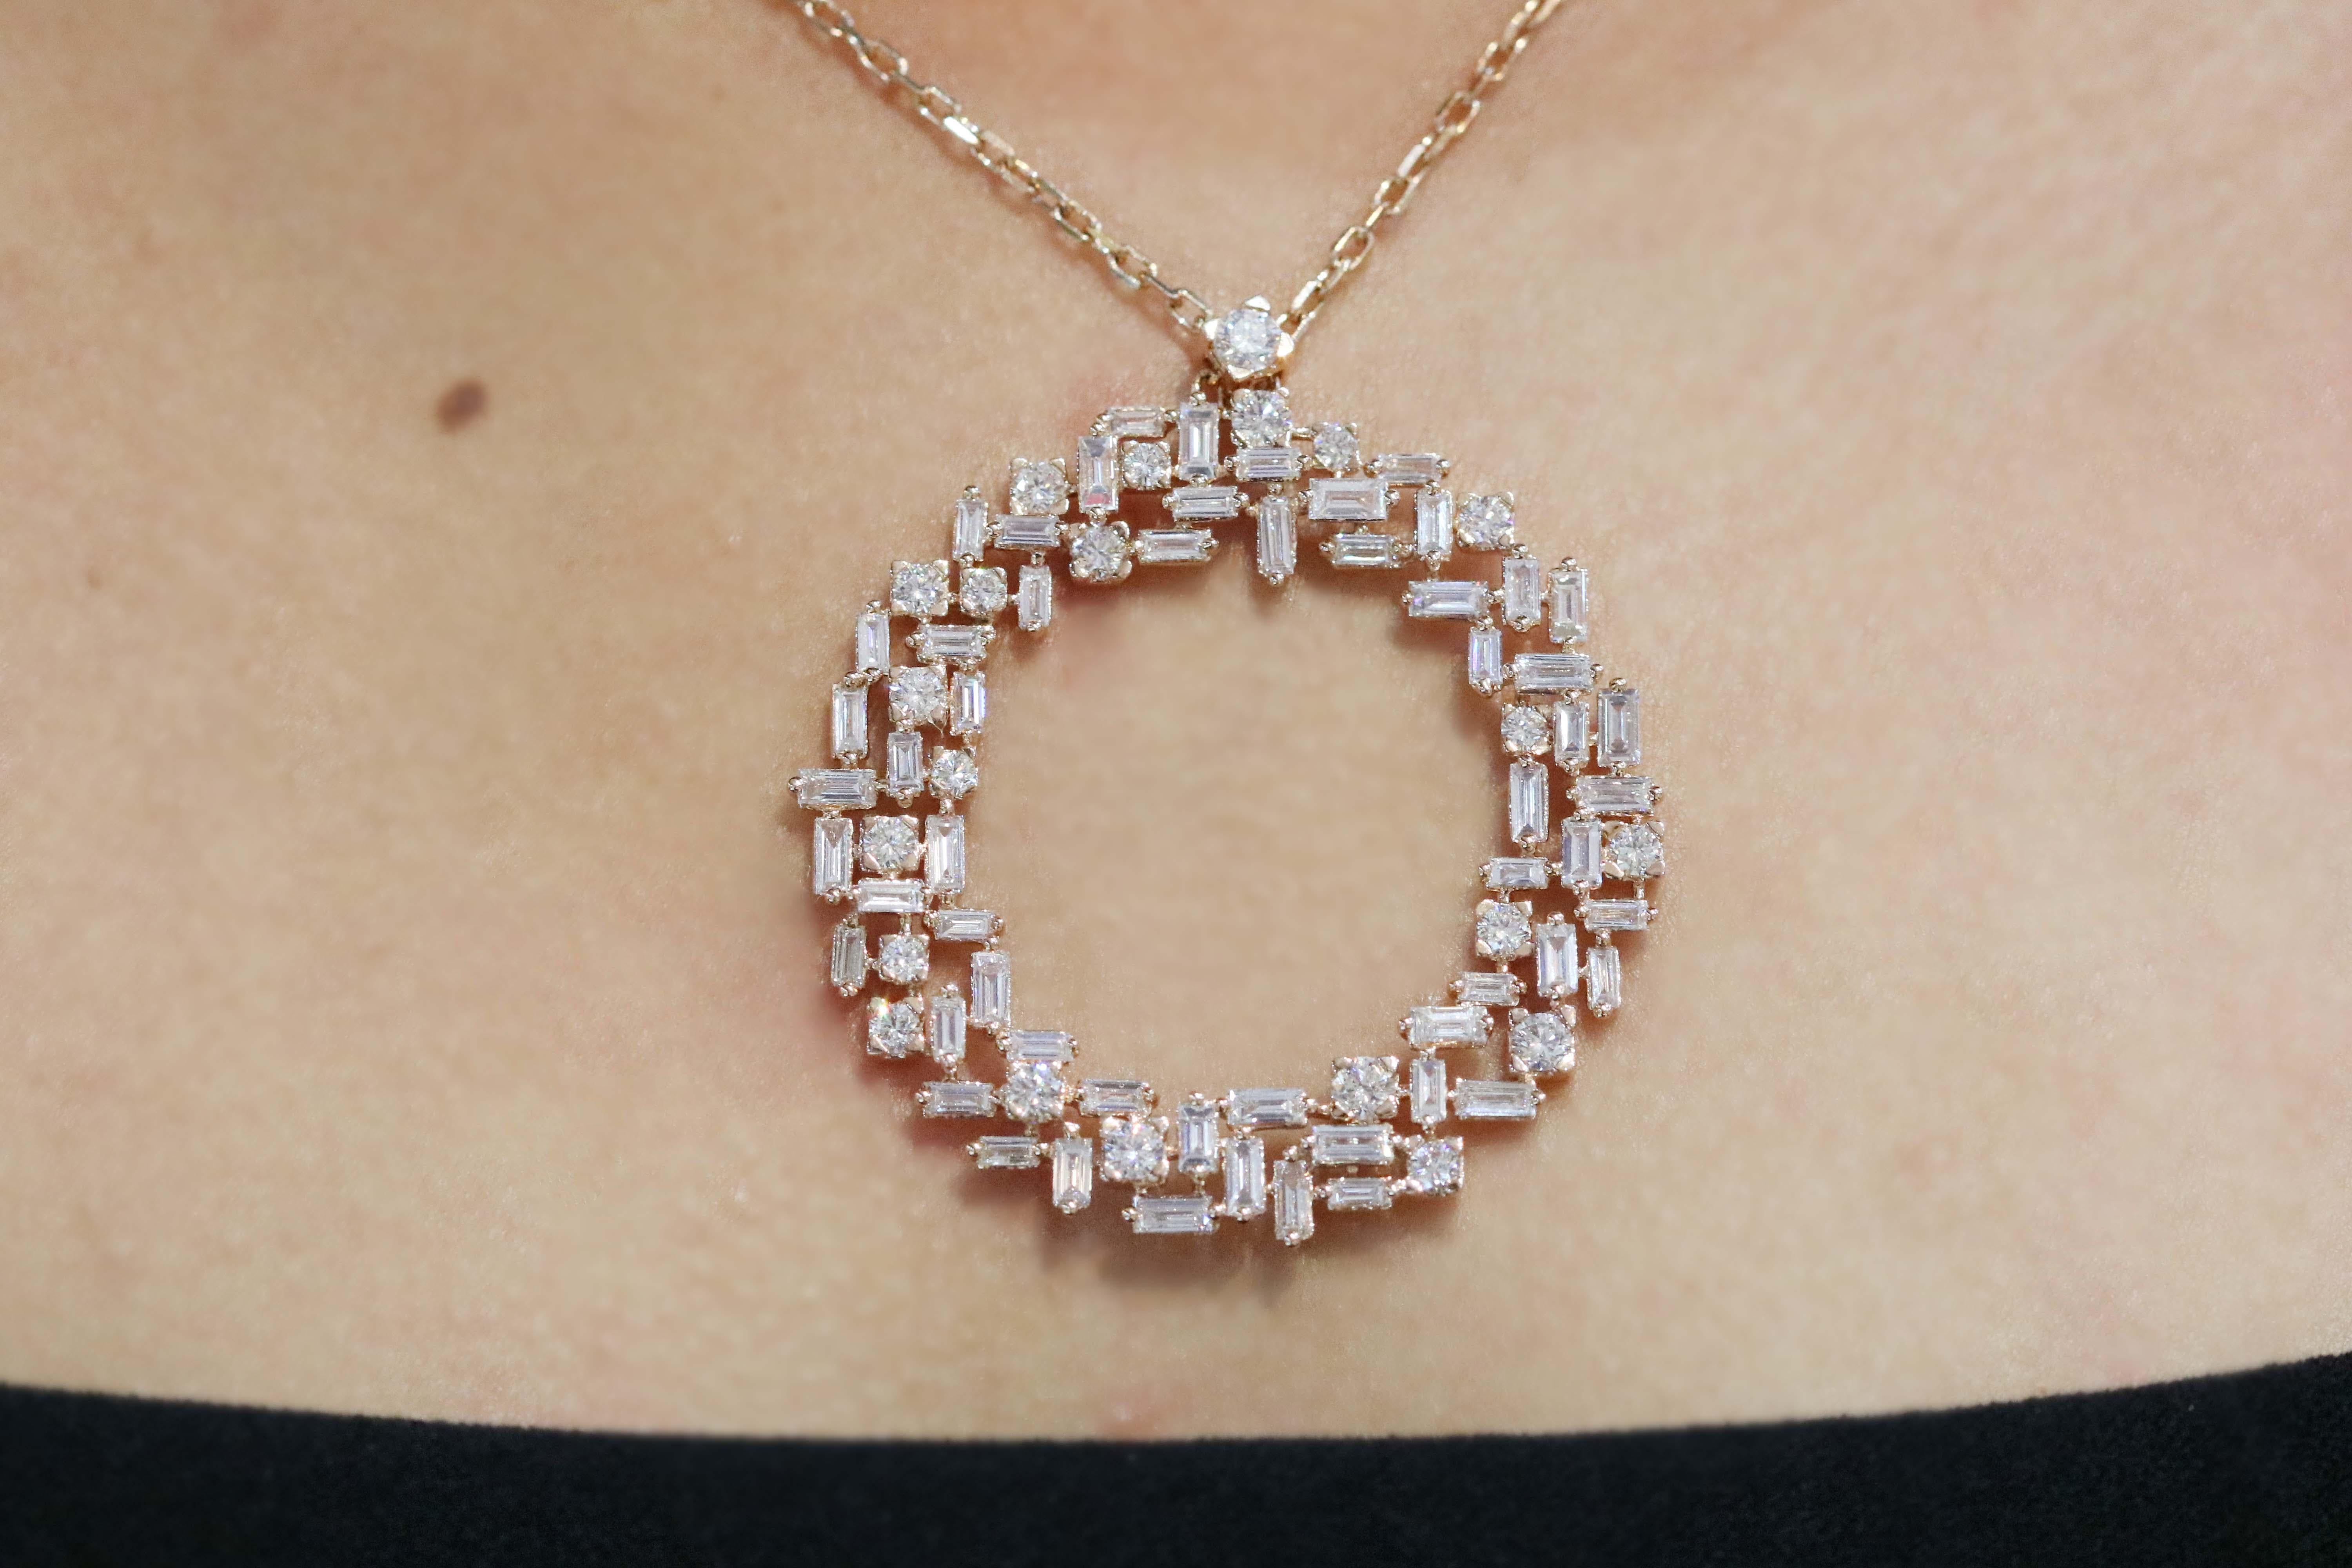 This rose gold pendant with baguette and round shape diamonds by Amwaj jewelry, as an illusion of a sparkling halo, is a perfect choice for casual, fashionable, but in the same time classy look. The round shape diamonds surrounded by the baguette